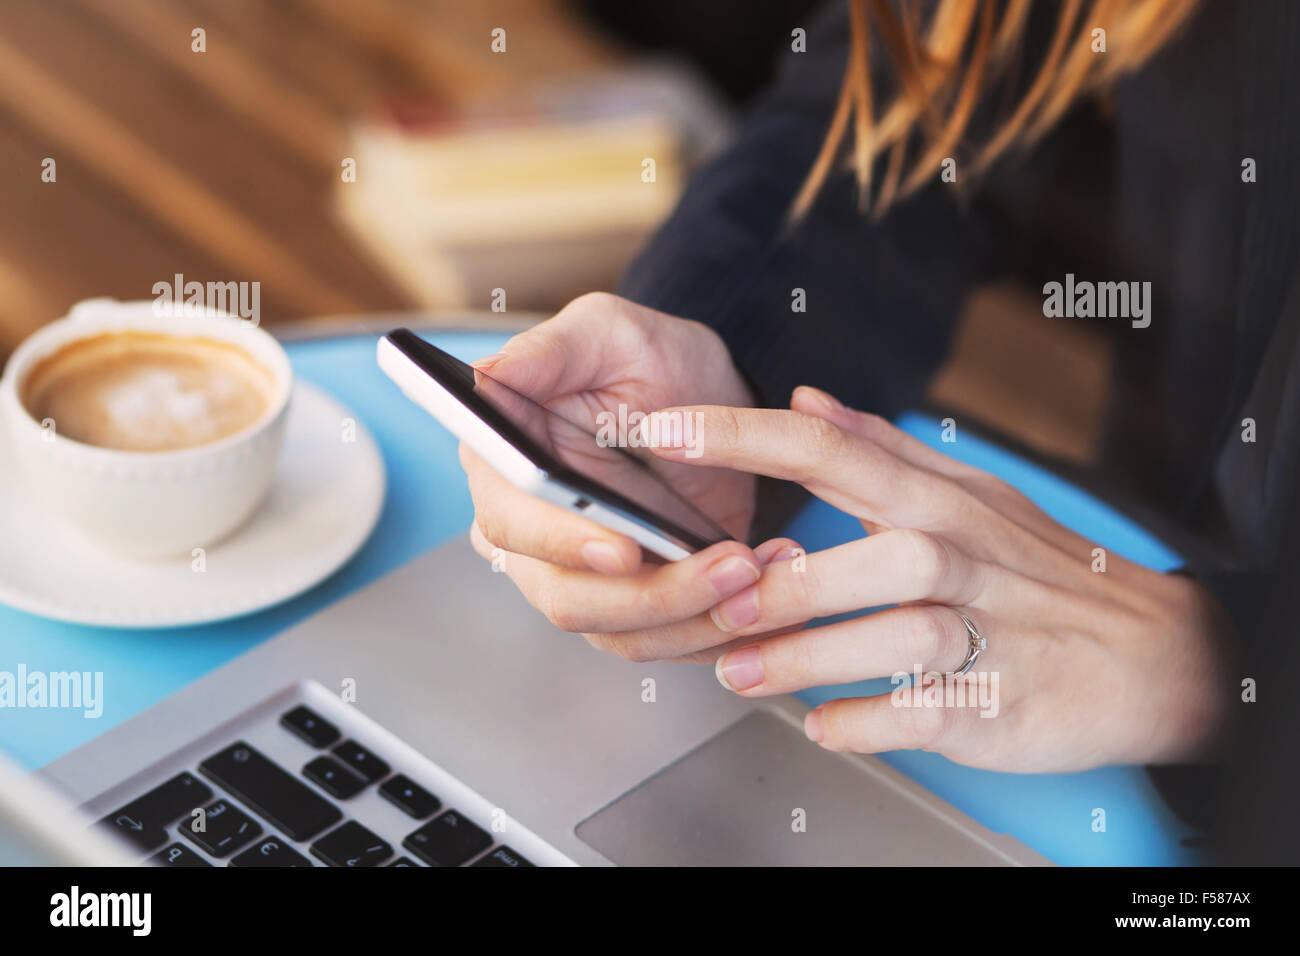 mobile internet, wifi connection on smartphone in cafe Stock Photo